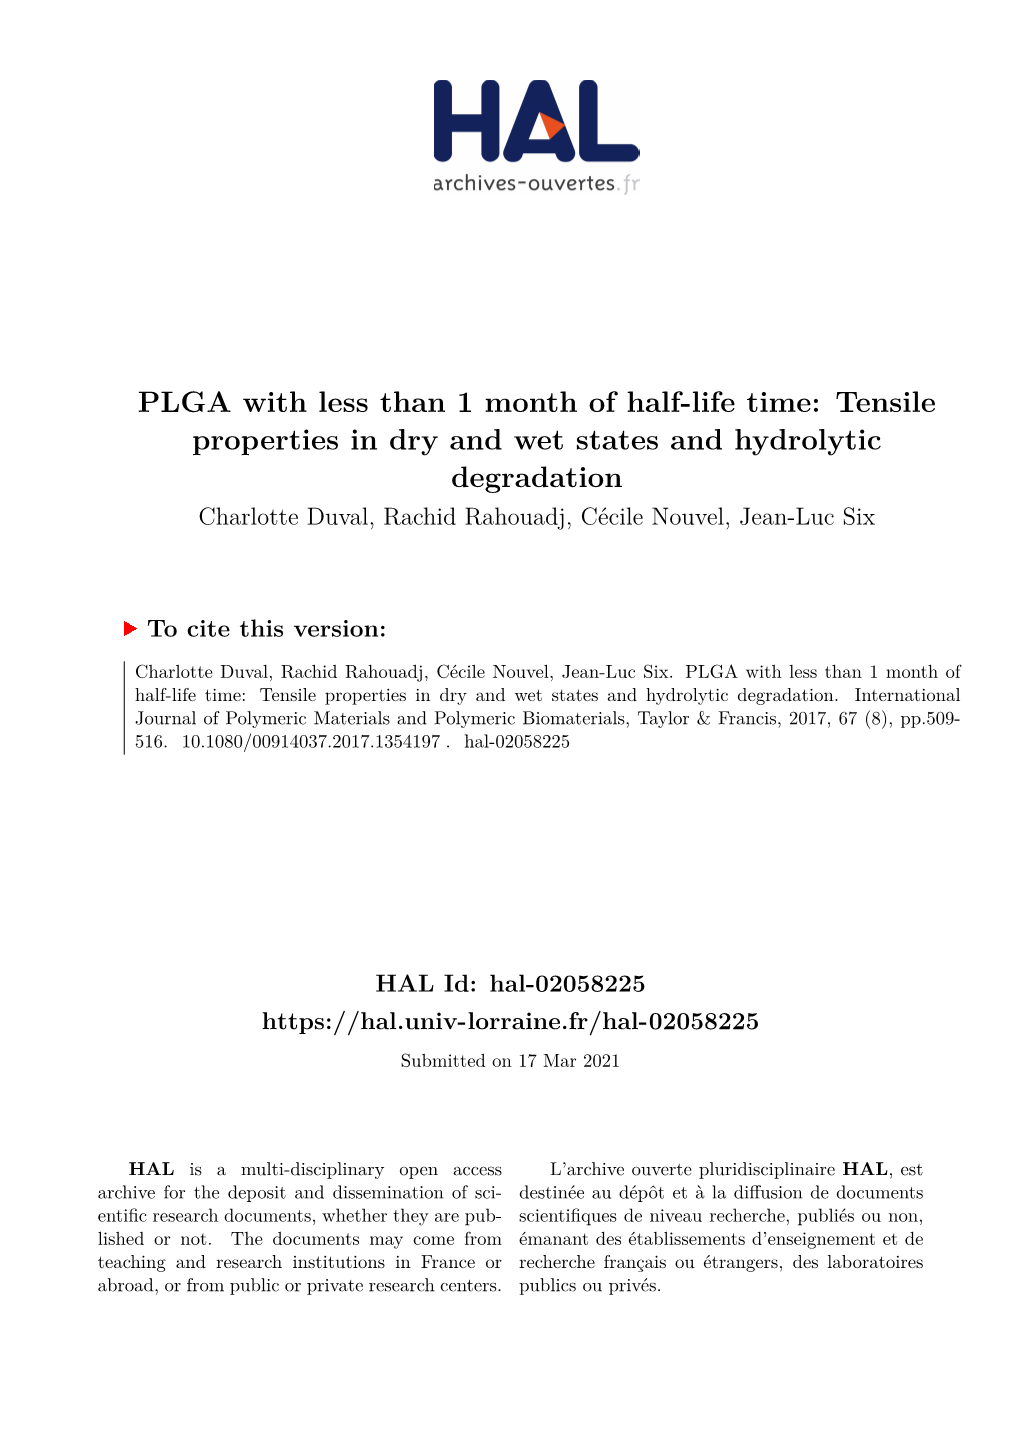 PLGA with Less Than 1 Month of Half-Life Time: Tensile Properties In